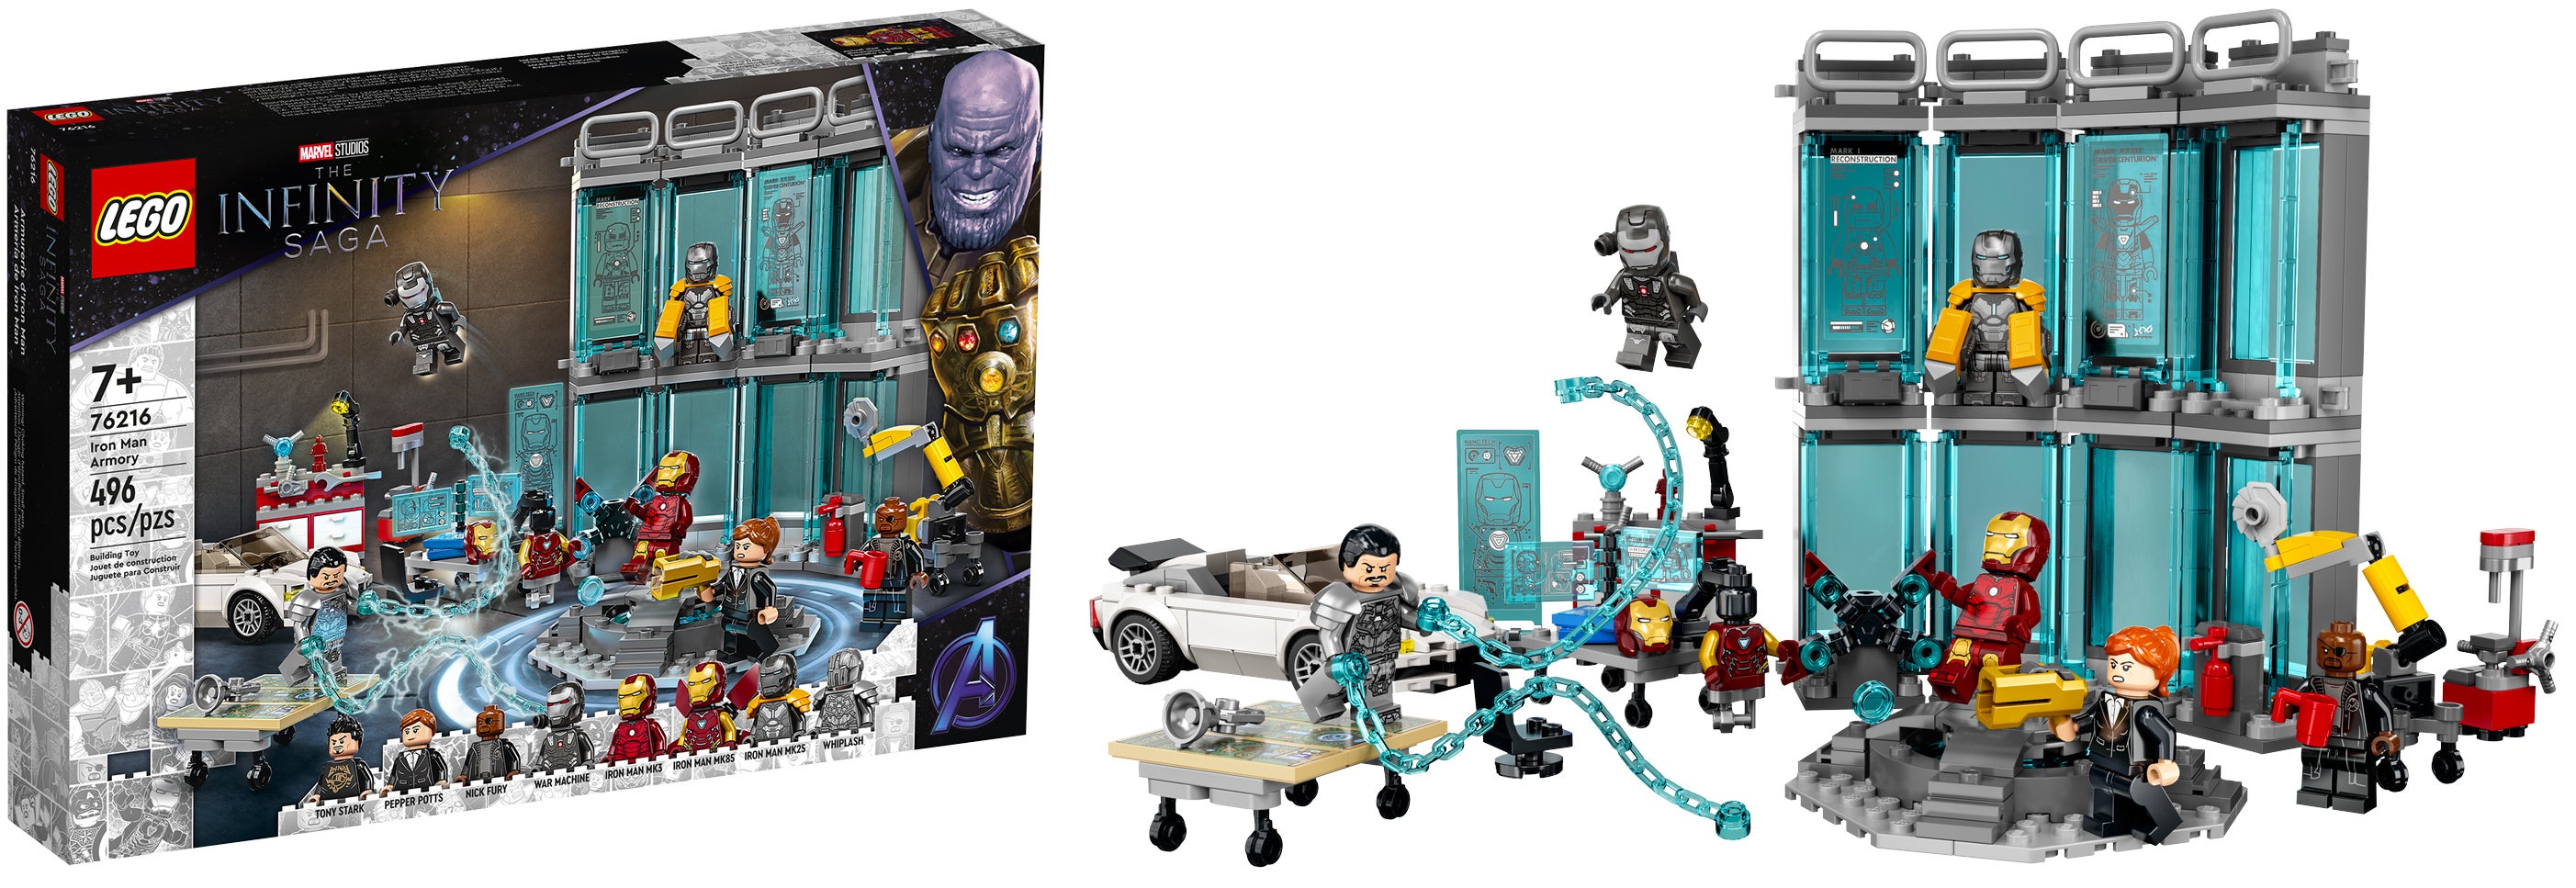 Star Wars, Marvel, and Hygienic Dinos Lead This Week’s Toy News